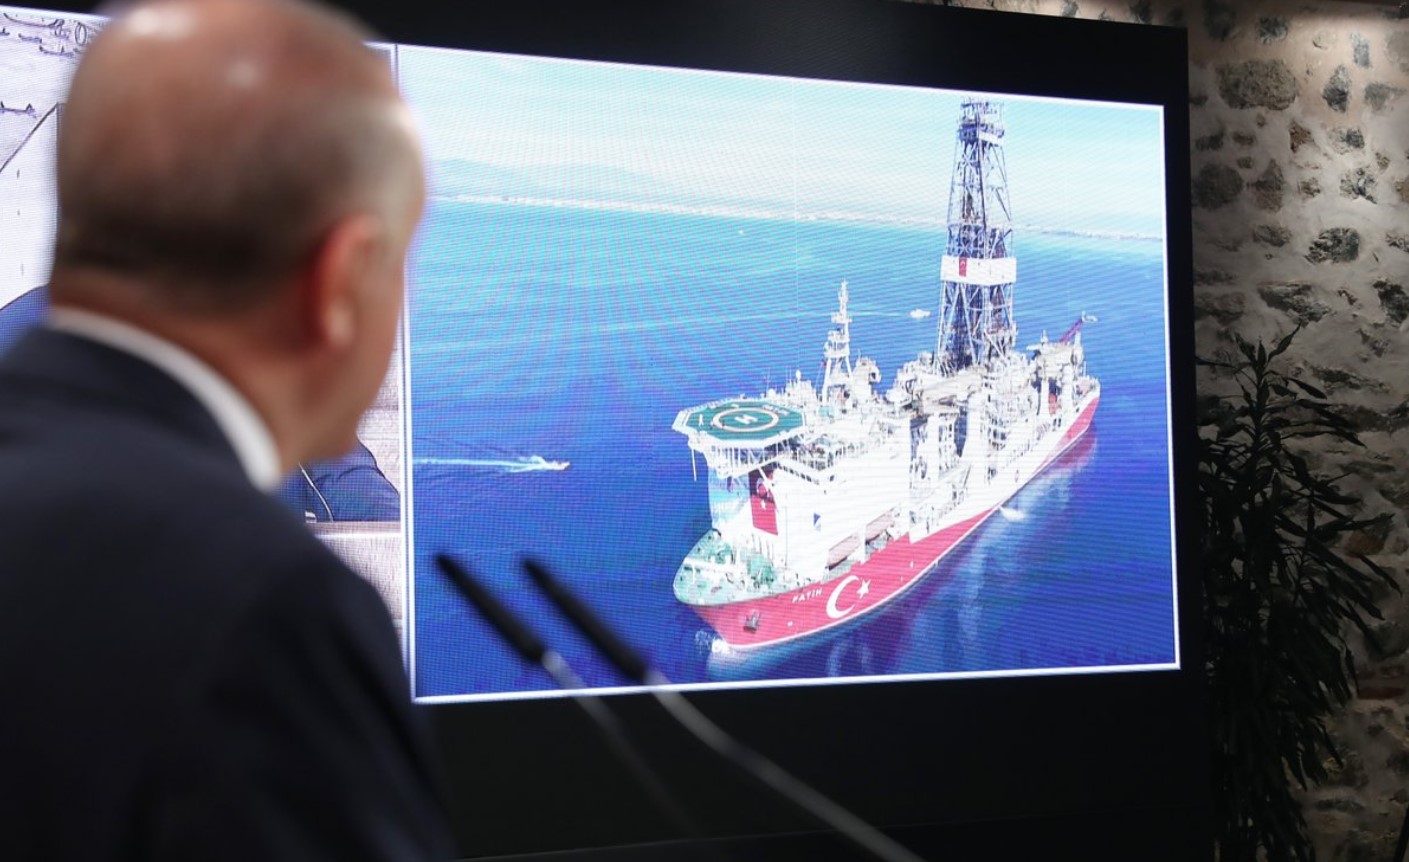 Recep Tayyip Erdoğan during the presentation of the discovery with the Fatih drillship image in the background; Source: Presidential website Turkey Wood Mackenzie